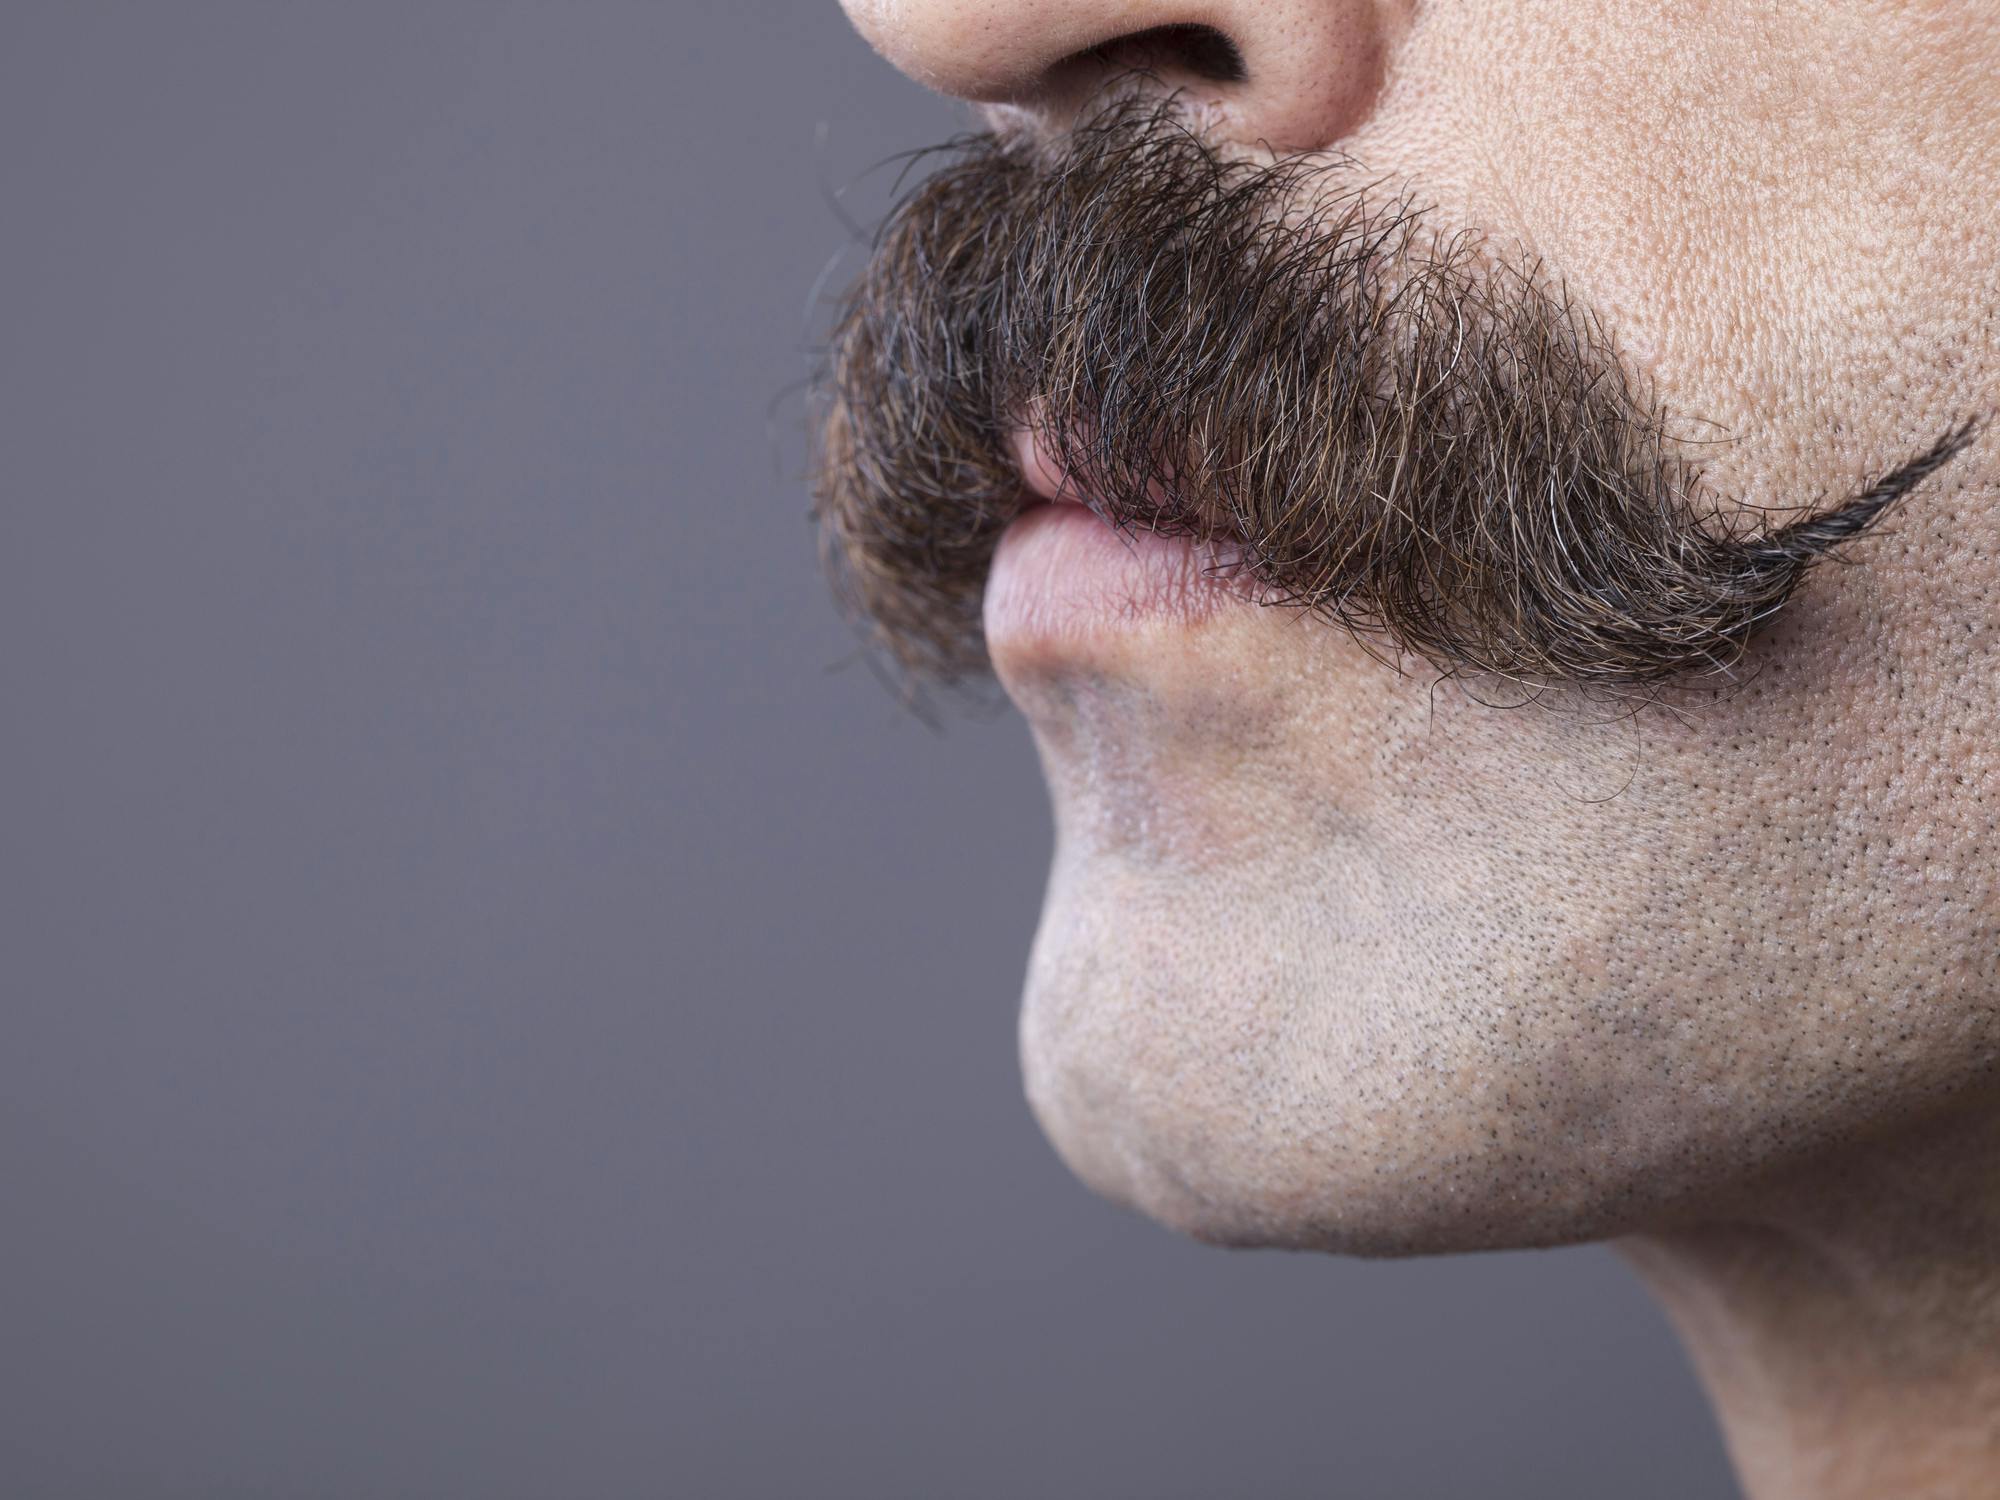 How Long Does It Take to Grow a Beard? Tips, Genetics, and More